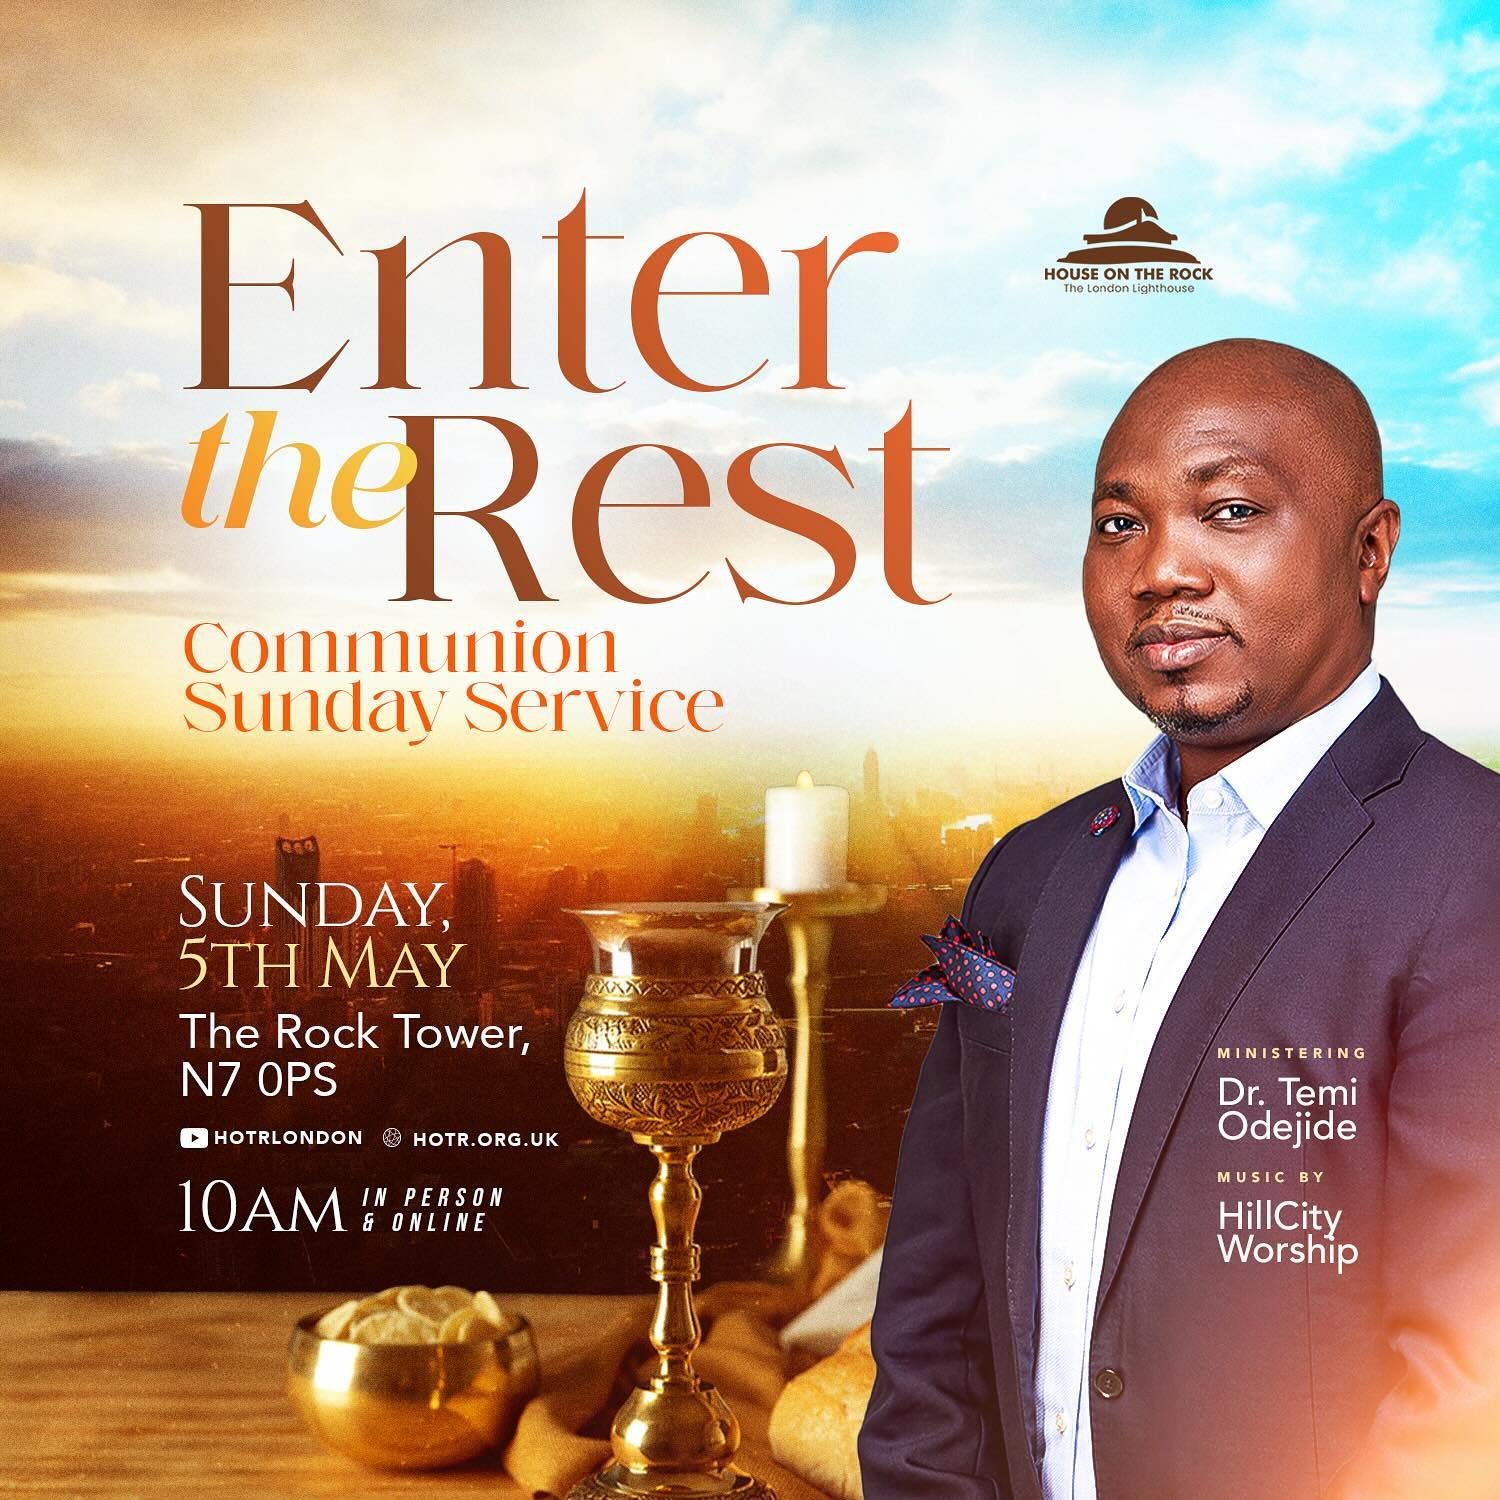 Enter into God&rsquo;s Rest by entering into His Word&hellip;

&rdquo;‭‭Hebrews‬ ‭4‬:‭8‬-‭11‬ ‭NLT -‬‬ Now if Joshua had succeeded in giving them this rest, God would not have spoken about another day of rest still to come. 

So there is a special re